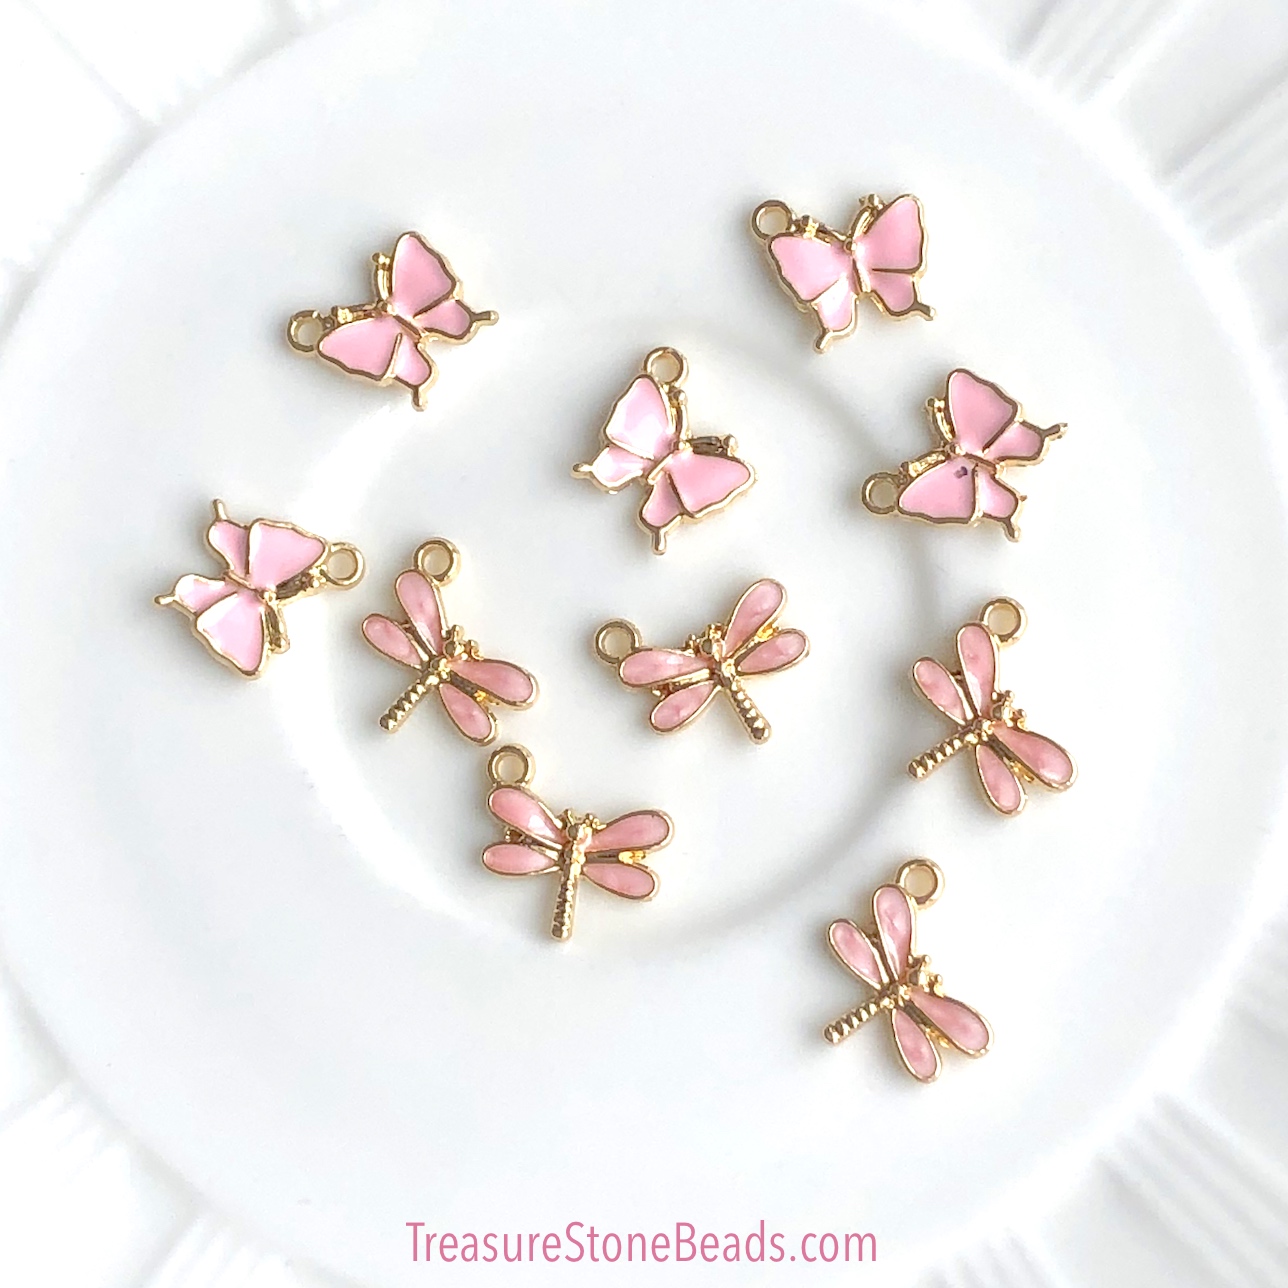 Charm / Pendant, 13x11mm pink butterfly, gold, Enamel. pack of 3 - Click Image to Close